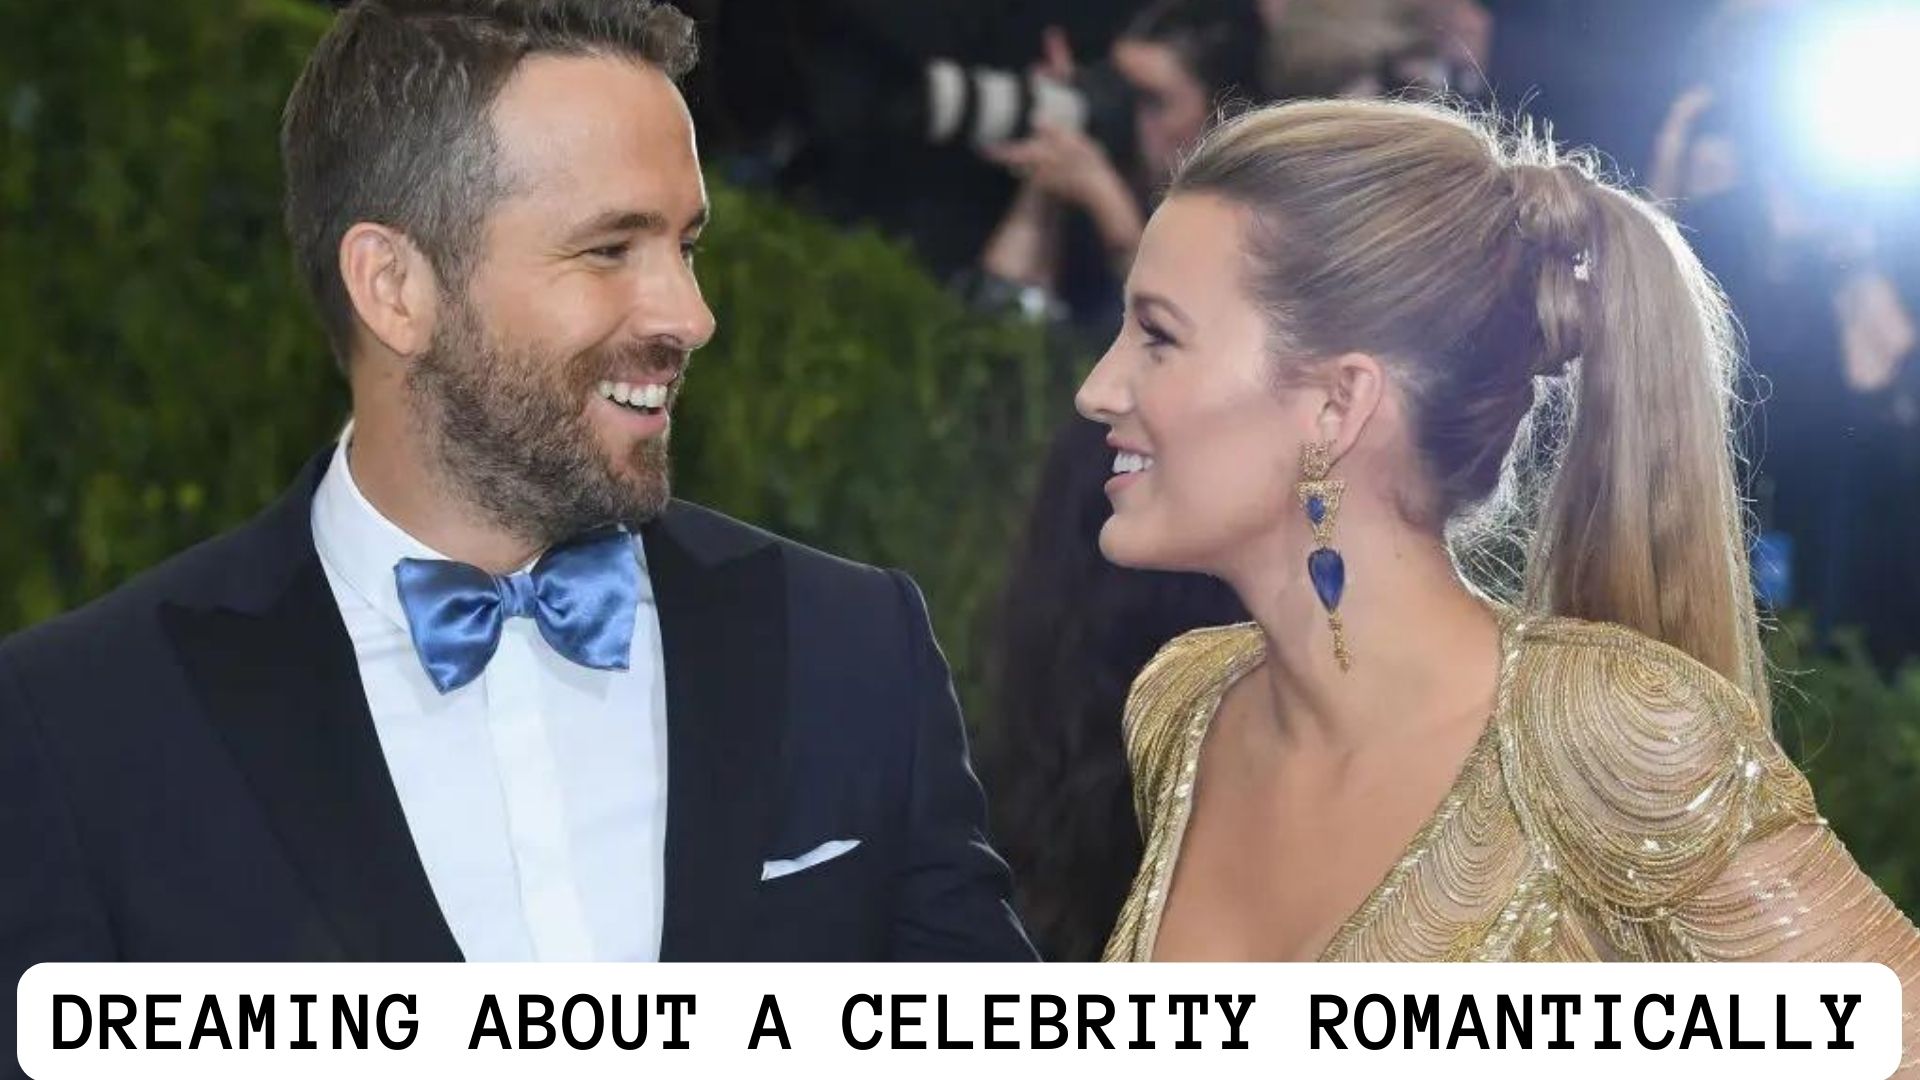 Dreaming About A Celebrity Romantically - What Does It Mean?